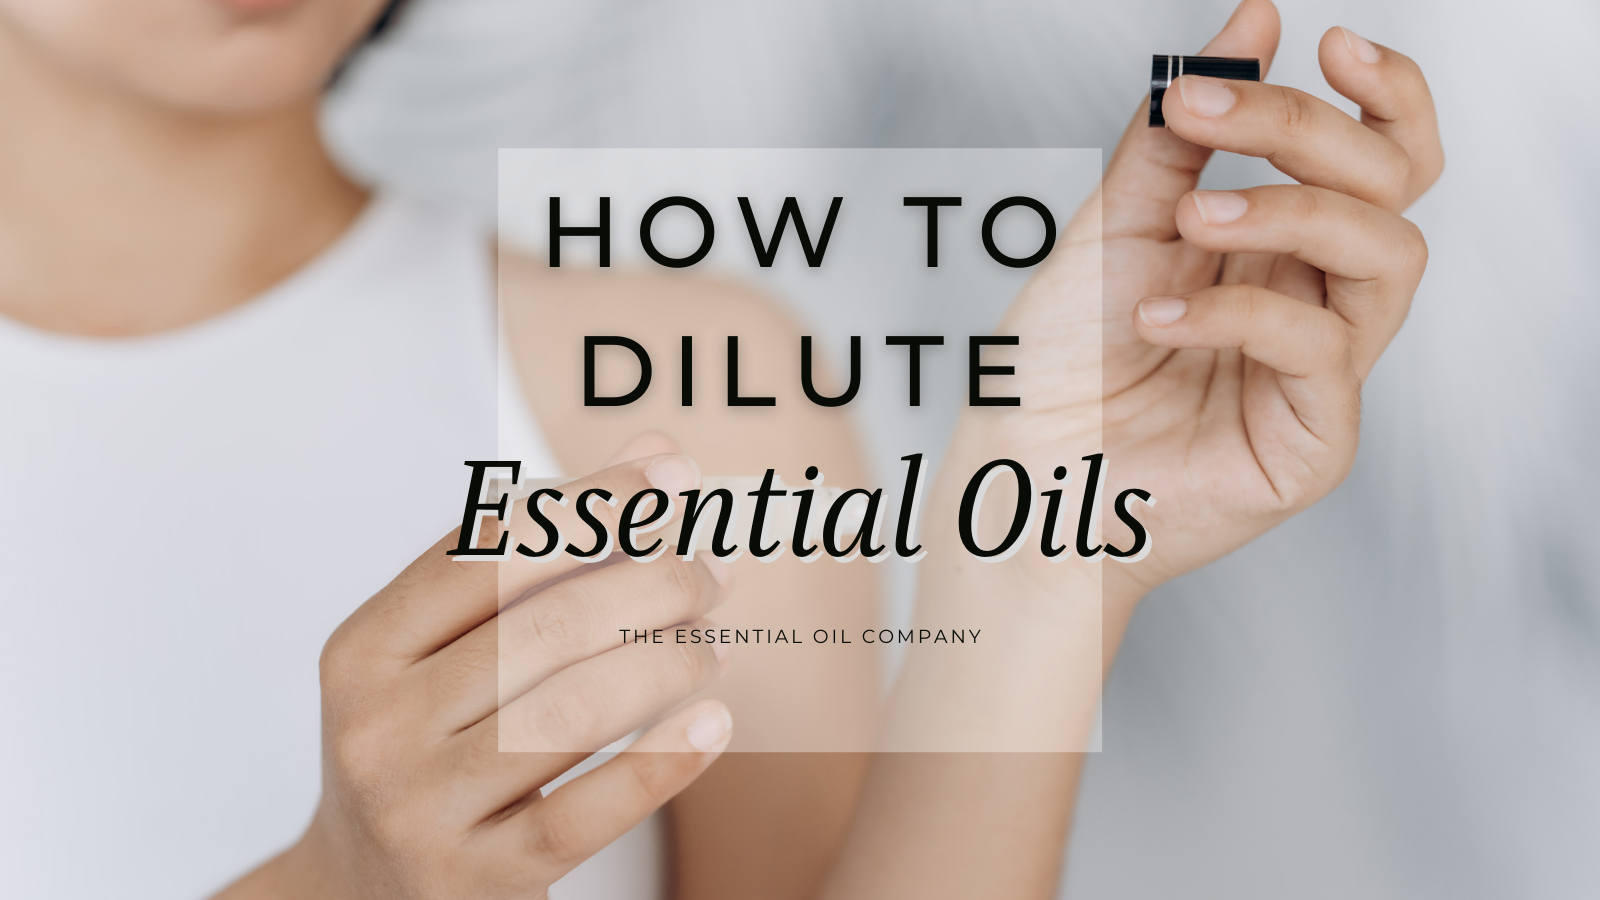 How to Dilute Essential Oils